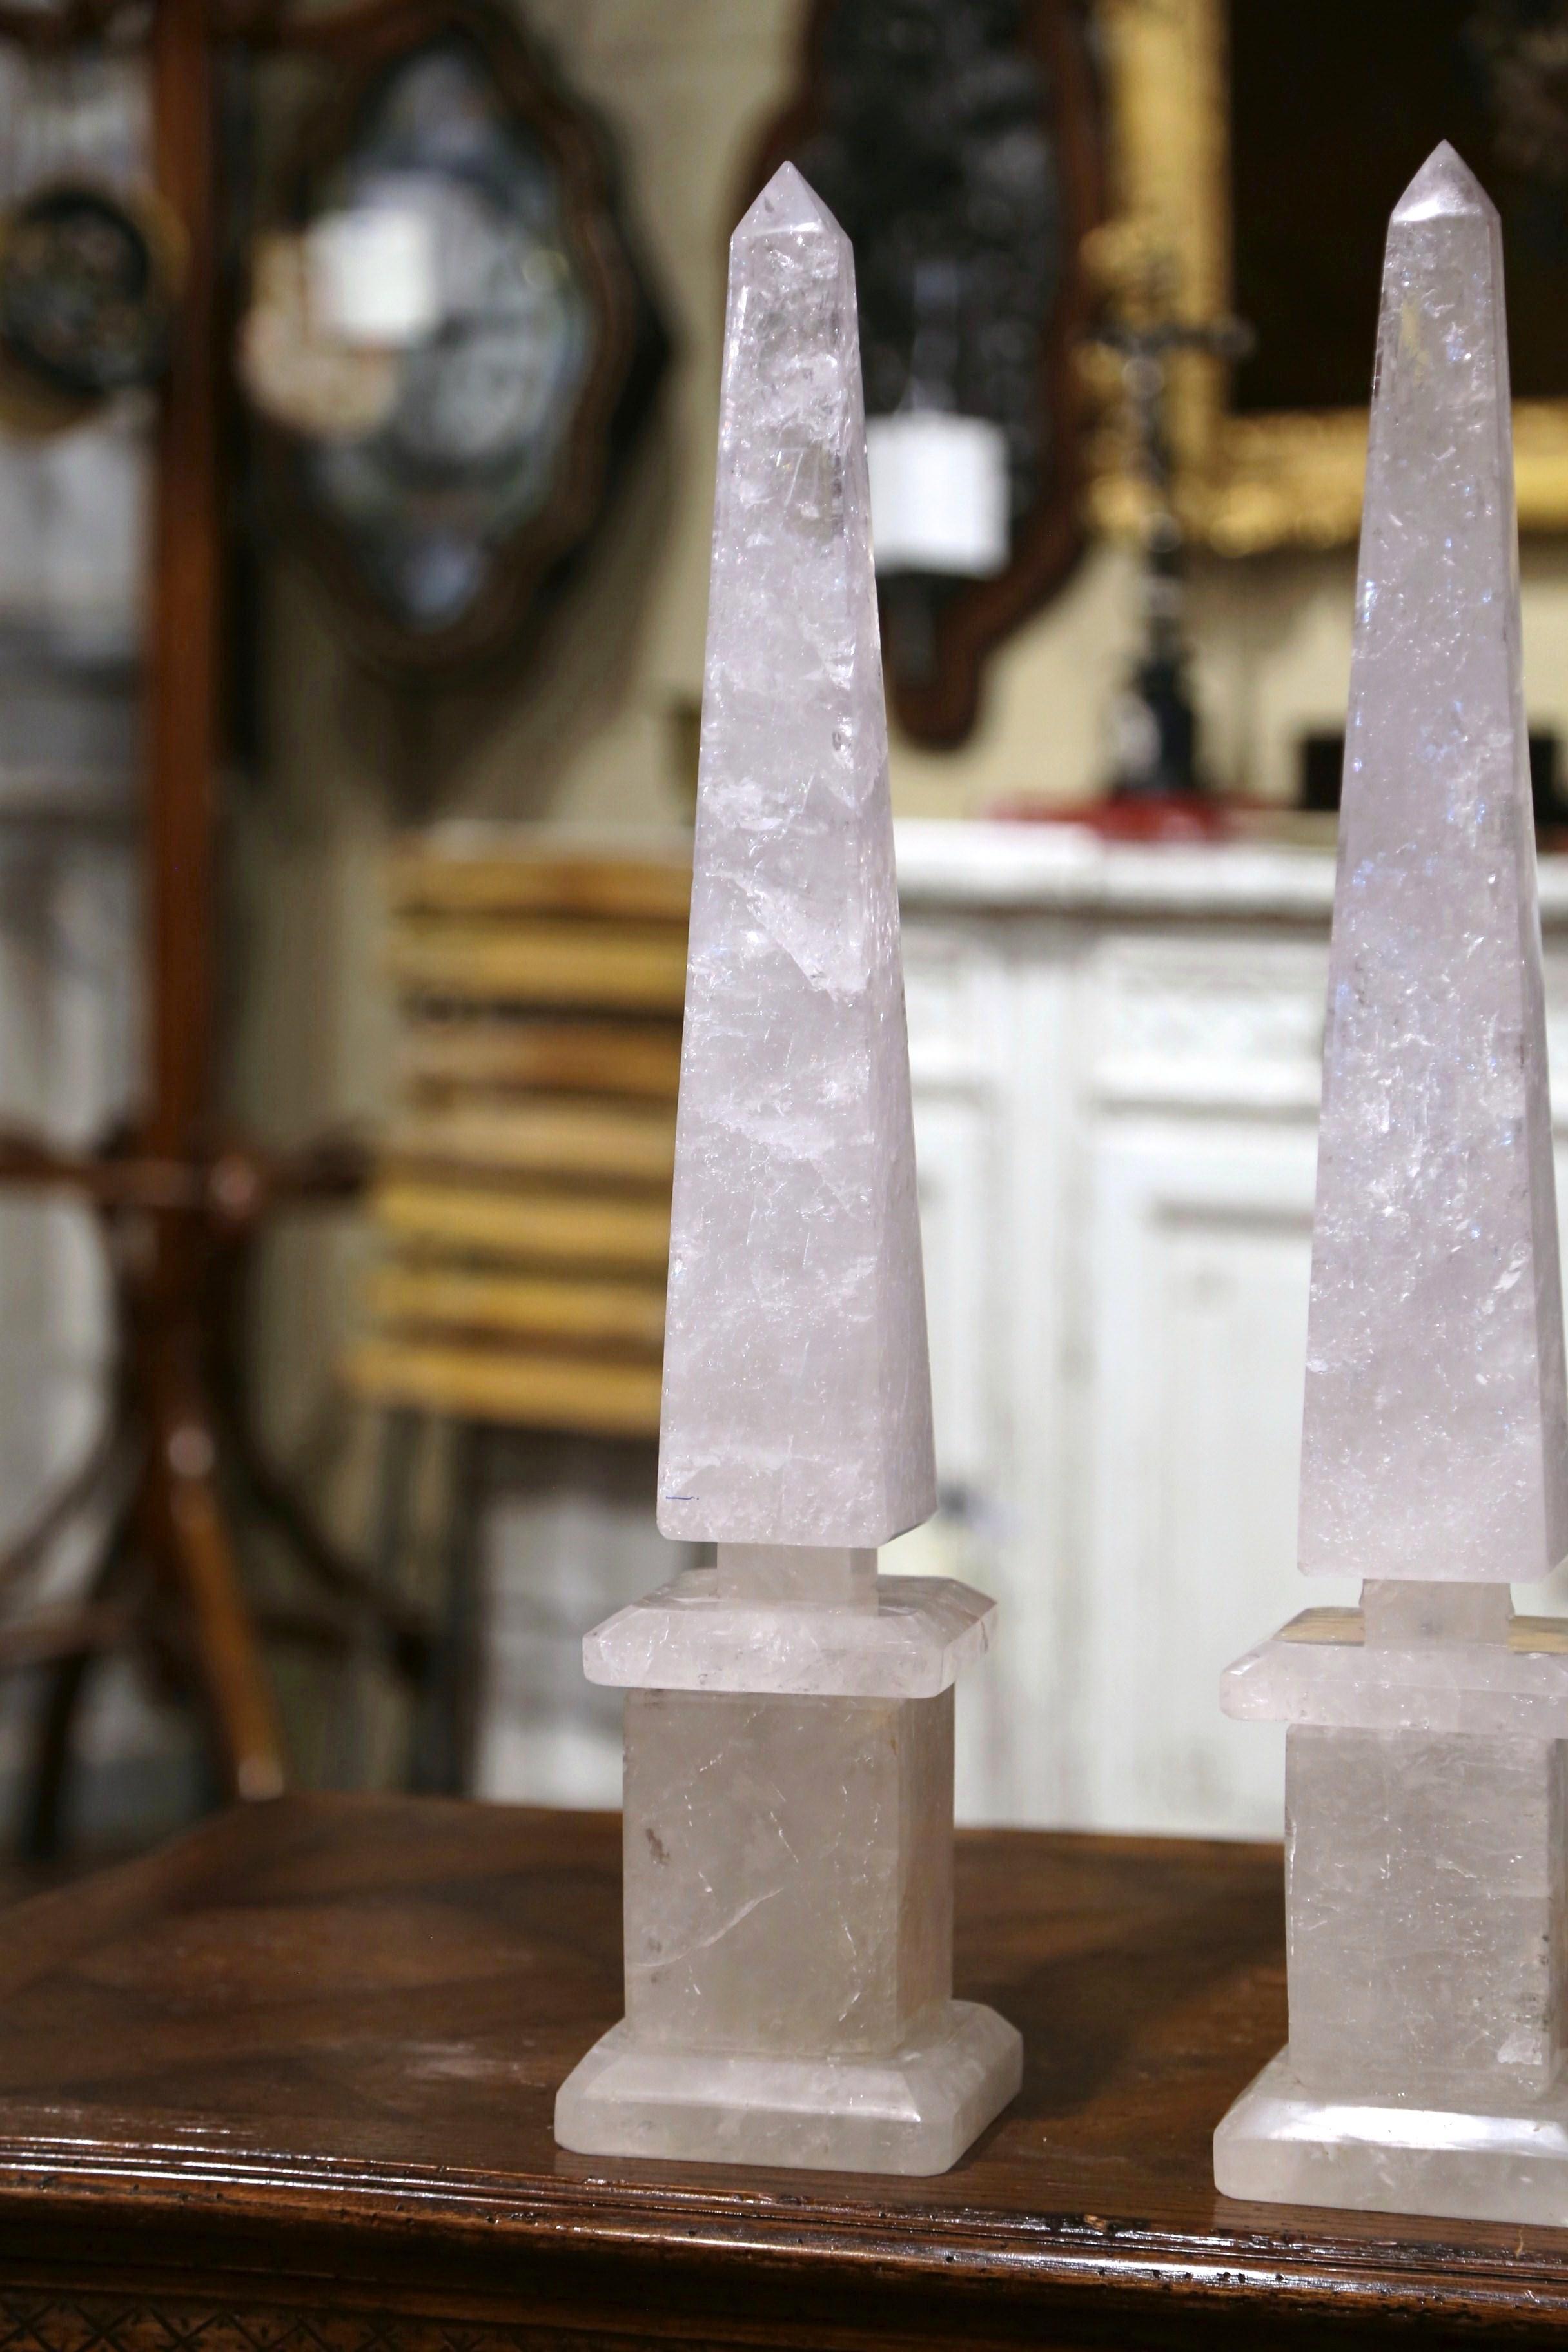 Crafted in Brazil and made of rock crystal, each obelisk is raised on a stepped square base and features exquisite craftsmanship with a tapered and pointed stem. Both elegant pieces are in excellent condition. Display these tall obelisks on a